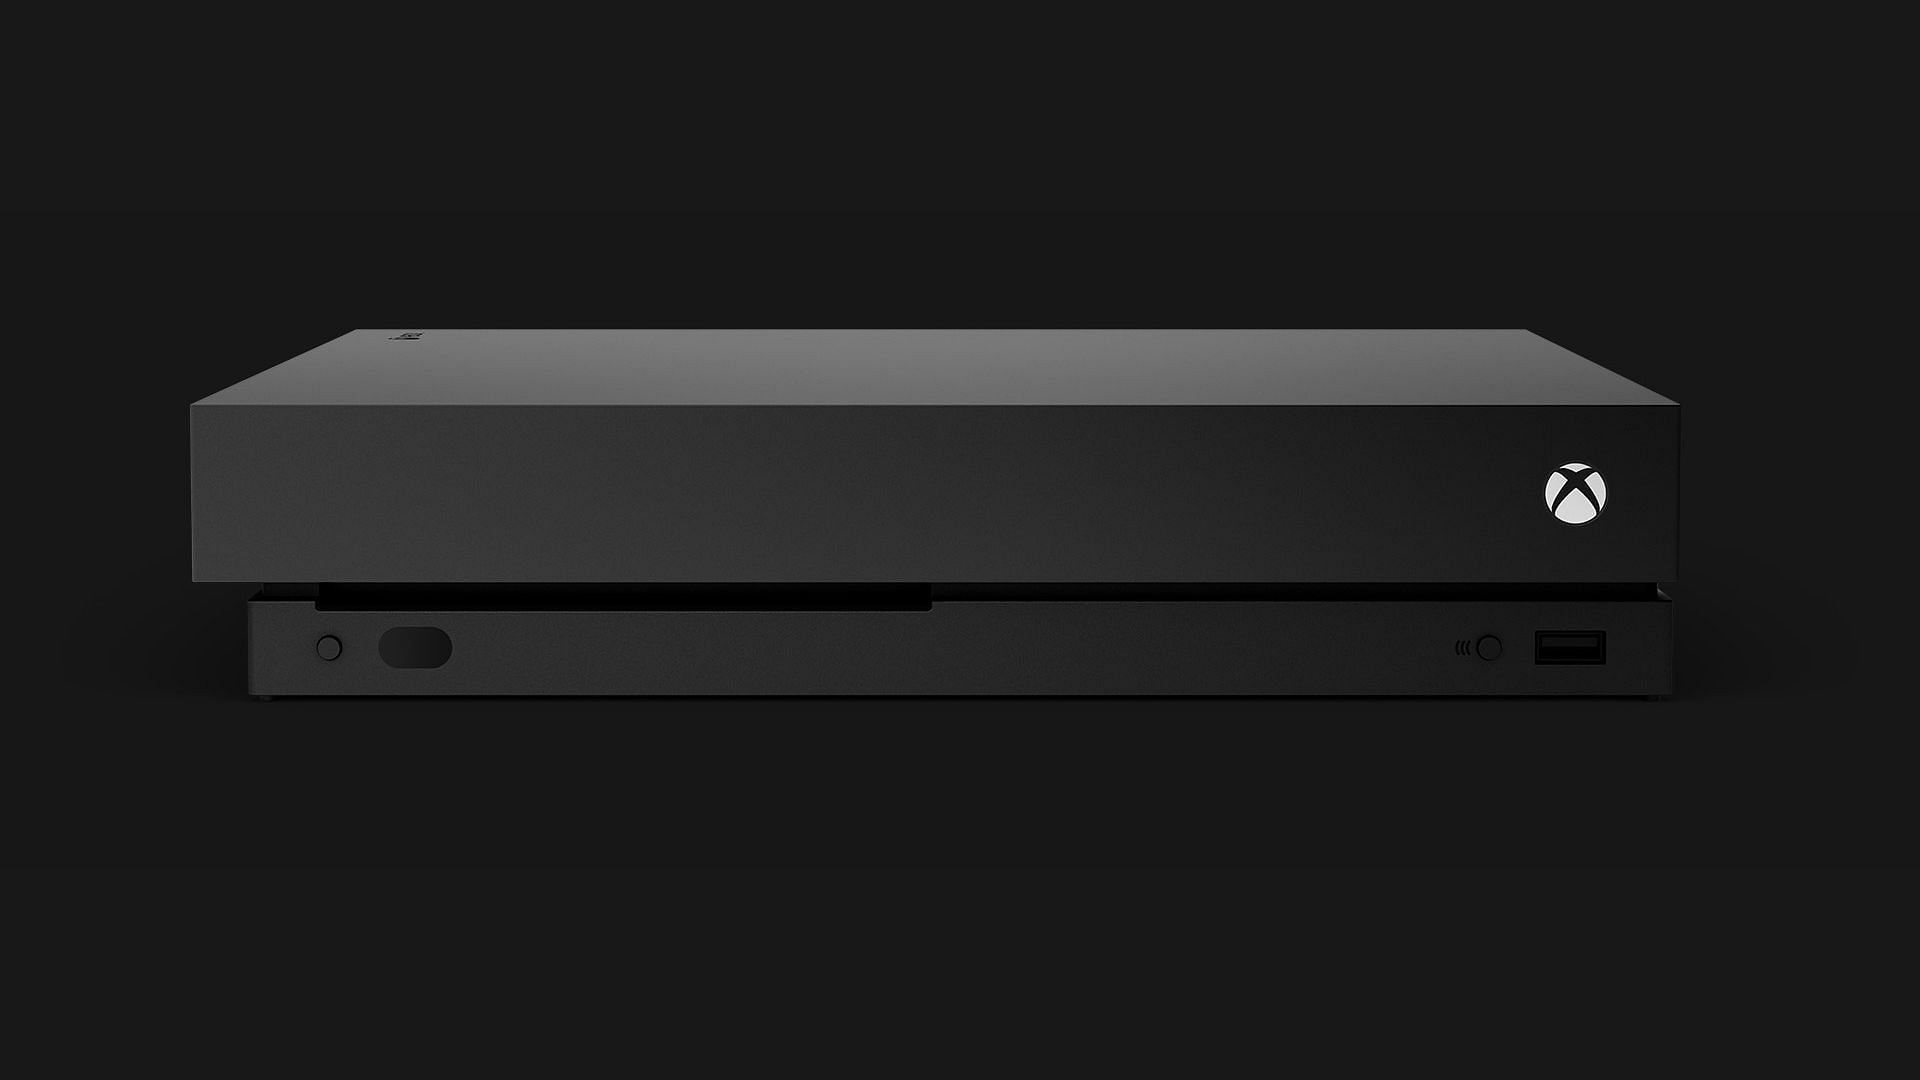 The Xbox One X was a major leap for Microsoft. (Image via Xbox)